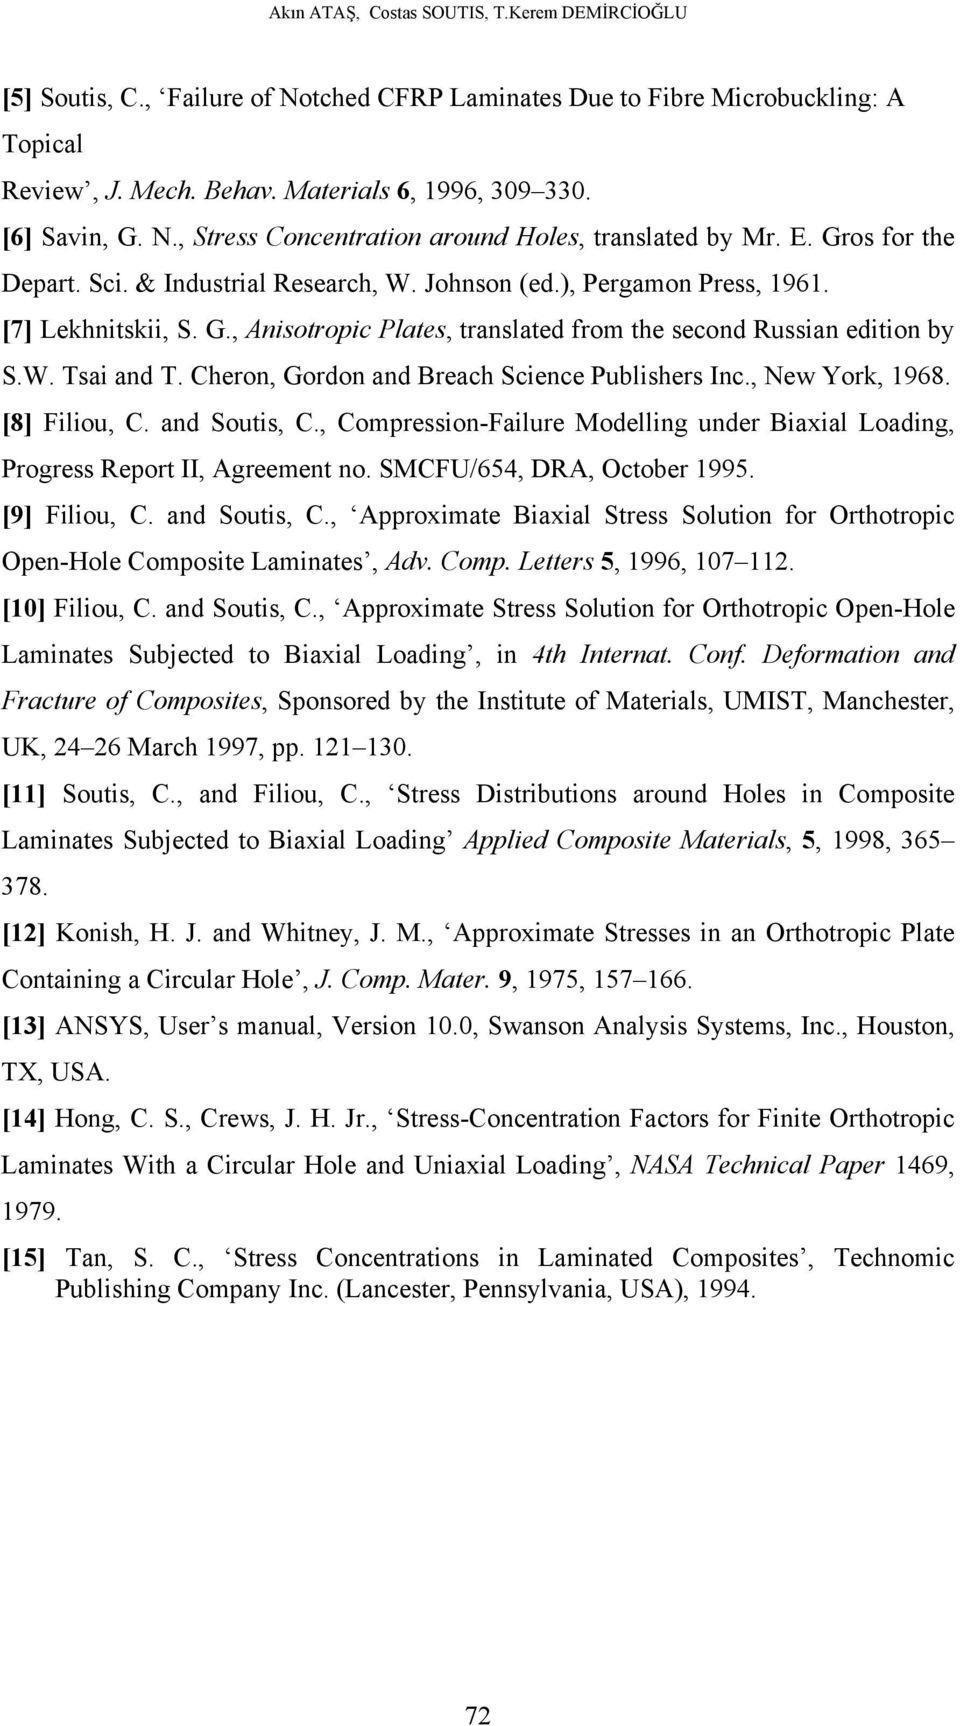 Cheron, Gordon and Breach Science Publishers Inc., New York, 1968. [8] Filiou, C. and Soutis, C., Compression-Failure Modelling under Biaxial Loading, Progress eport II, greement no.